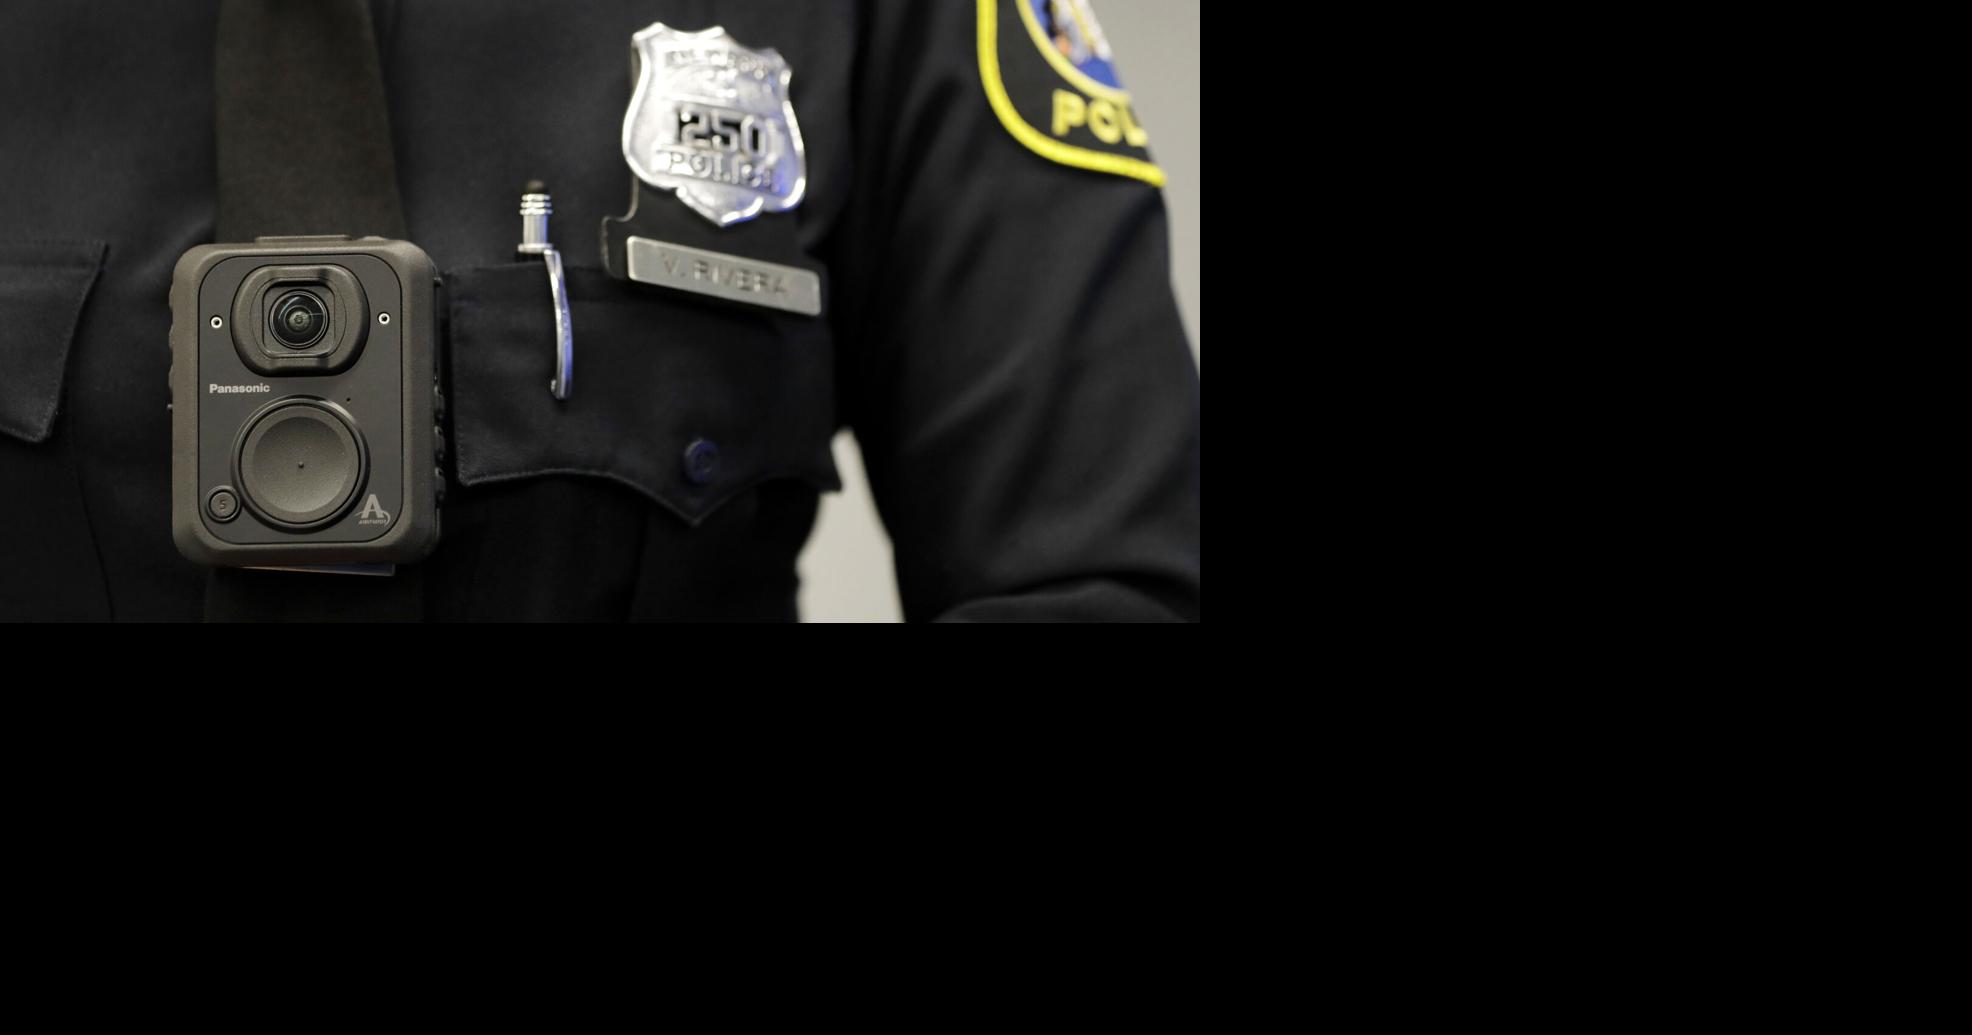 Pittsfield police have legal concerns about body cameras, but more than 100 Massachusetts police departments use them